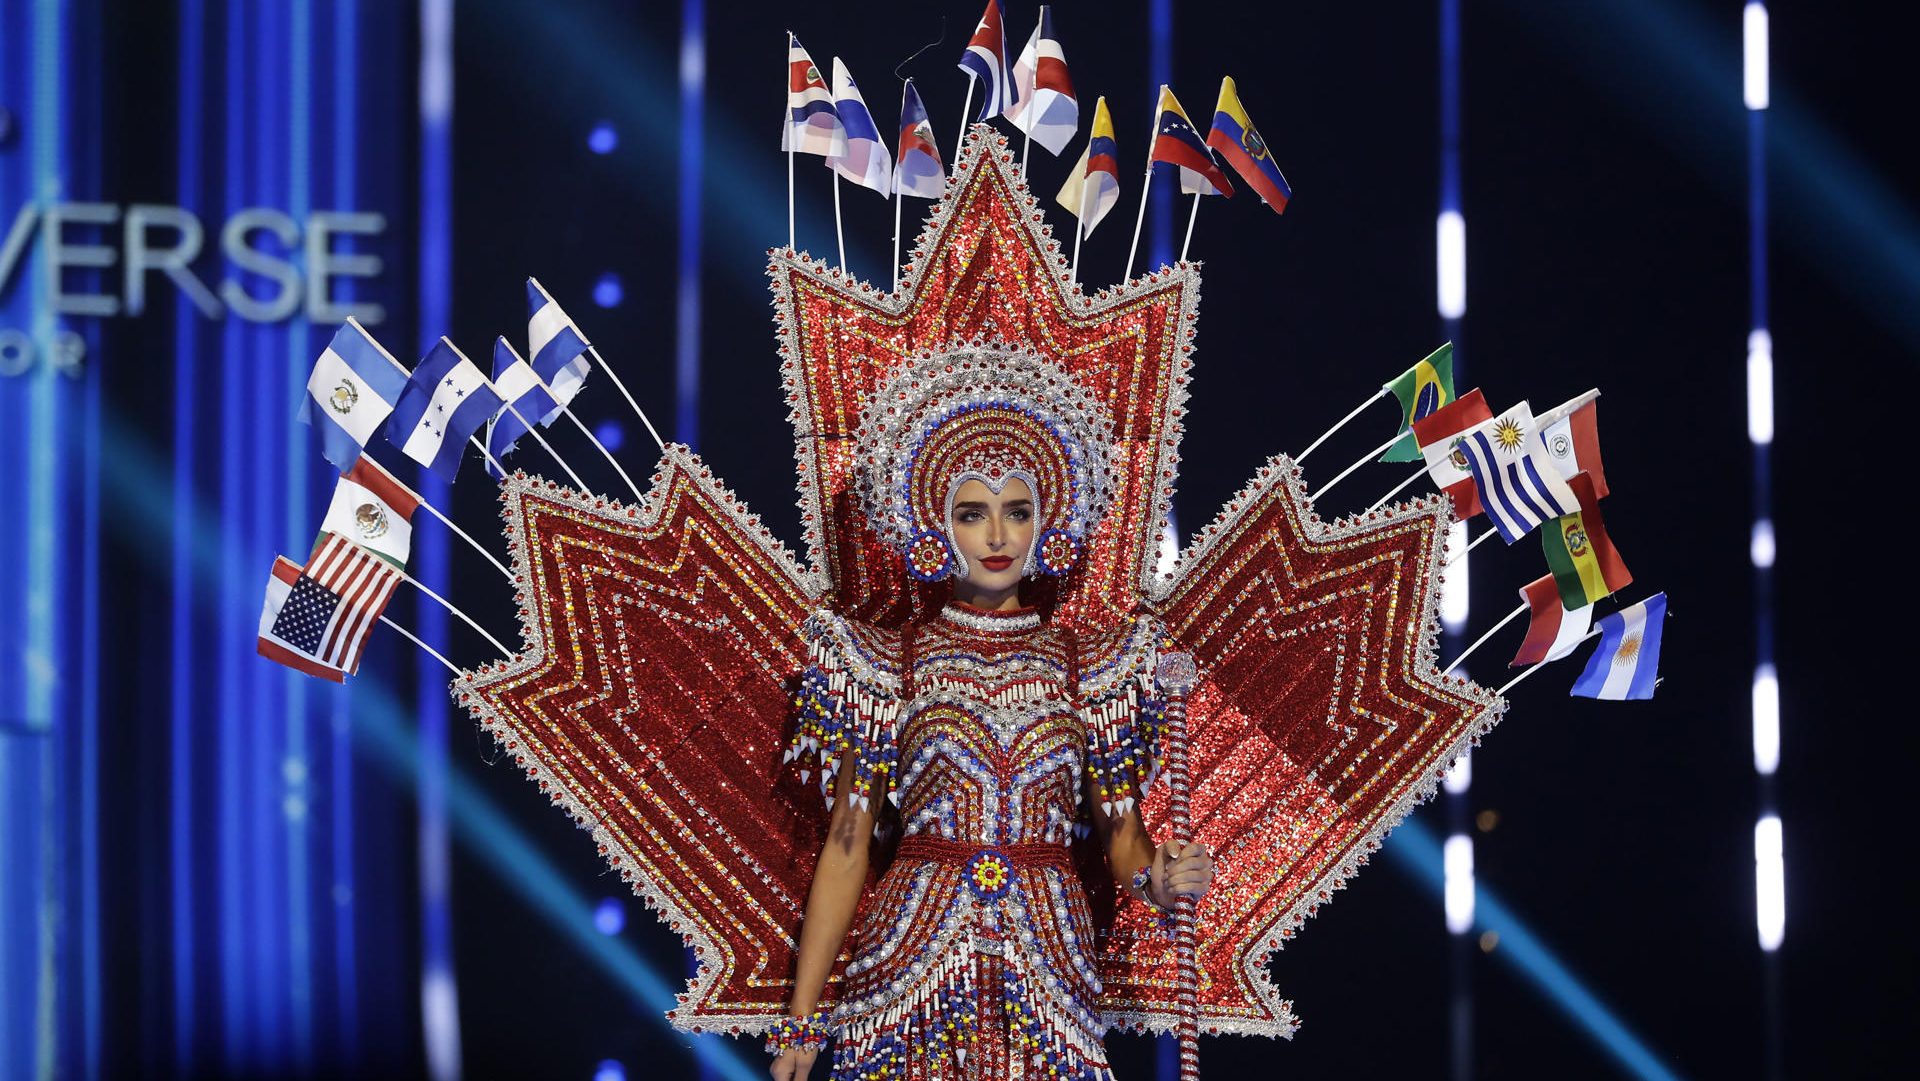 Miss Universe 2023 candidates wear colorful outfits in gala prior to